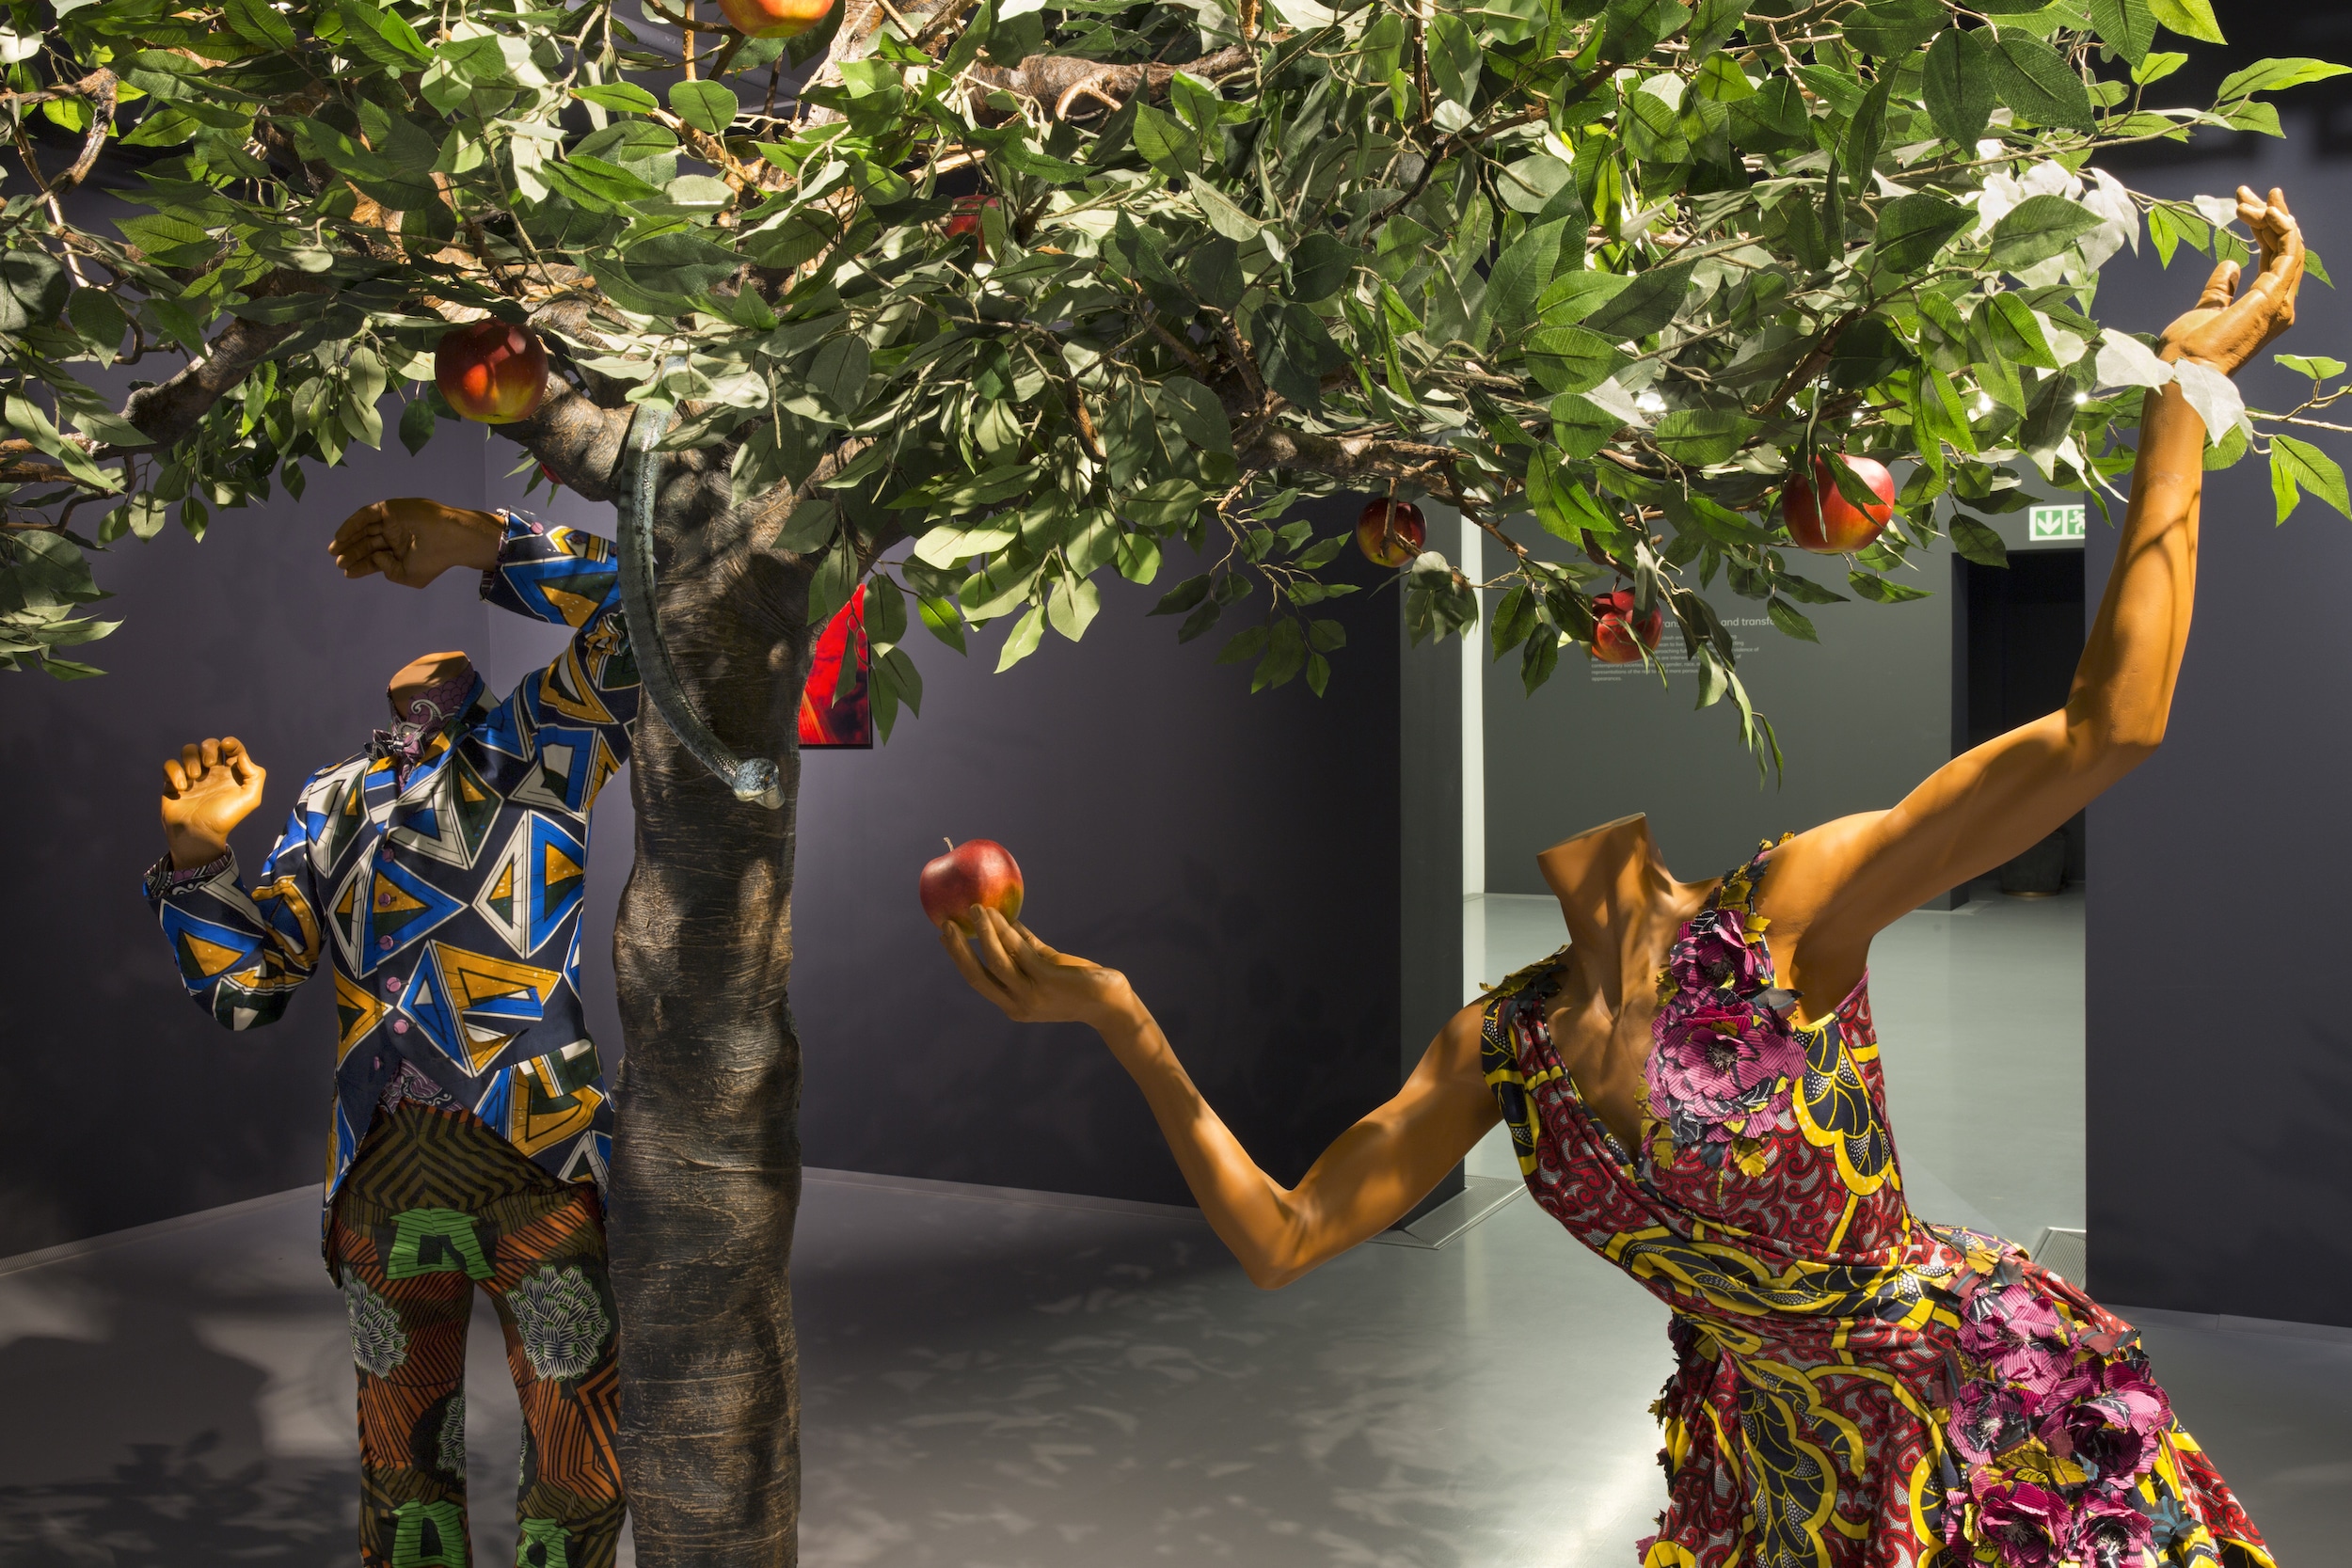 Yinka Shonibare, CBE. Adam and Eve. 2013. Fibreglass mannequins, Dutch wax printed cotton textile, fibreglass, wire, leather and steel baseplates. 285 x 230 x 115 cm. Installation view.